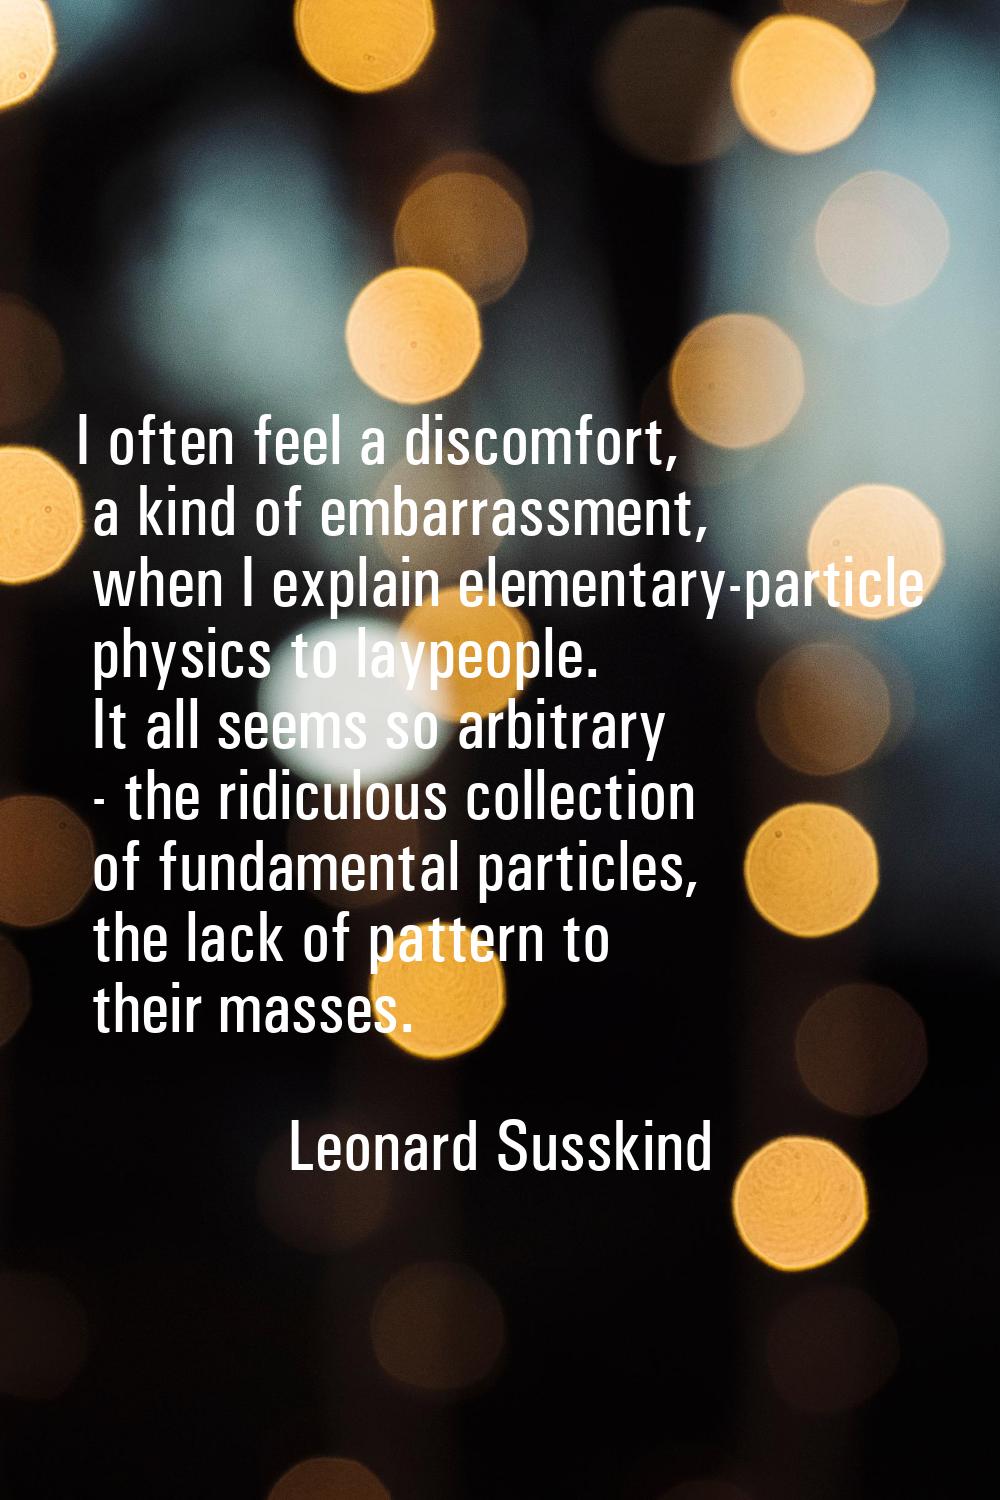 I often feel a discomfort, a kind of embarrassment, when I explain elementary-particle physics to l